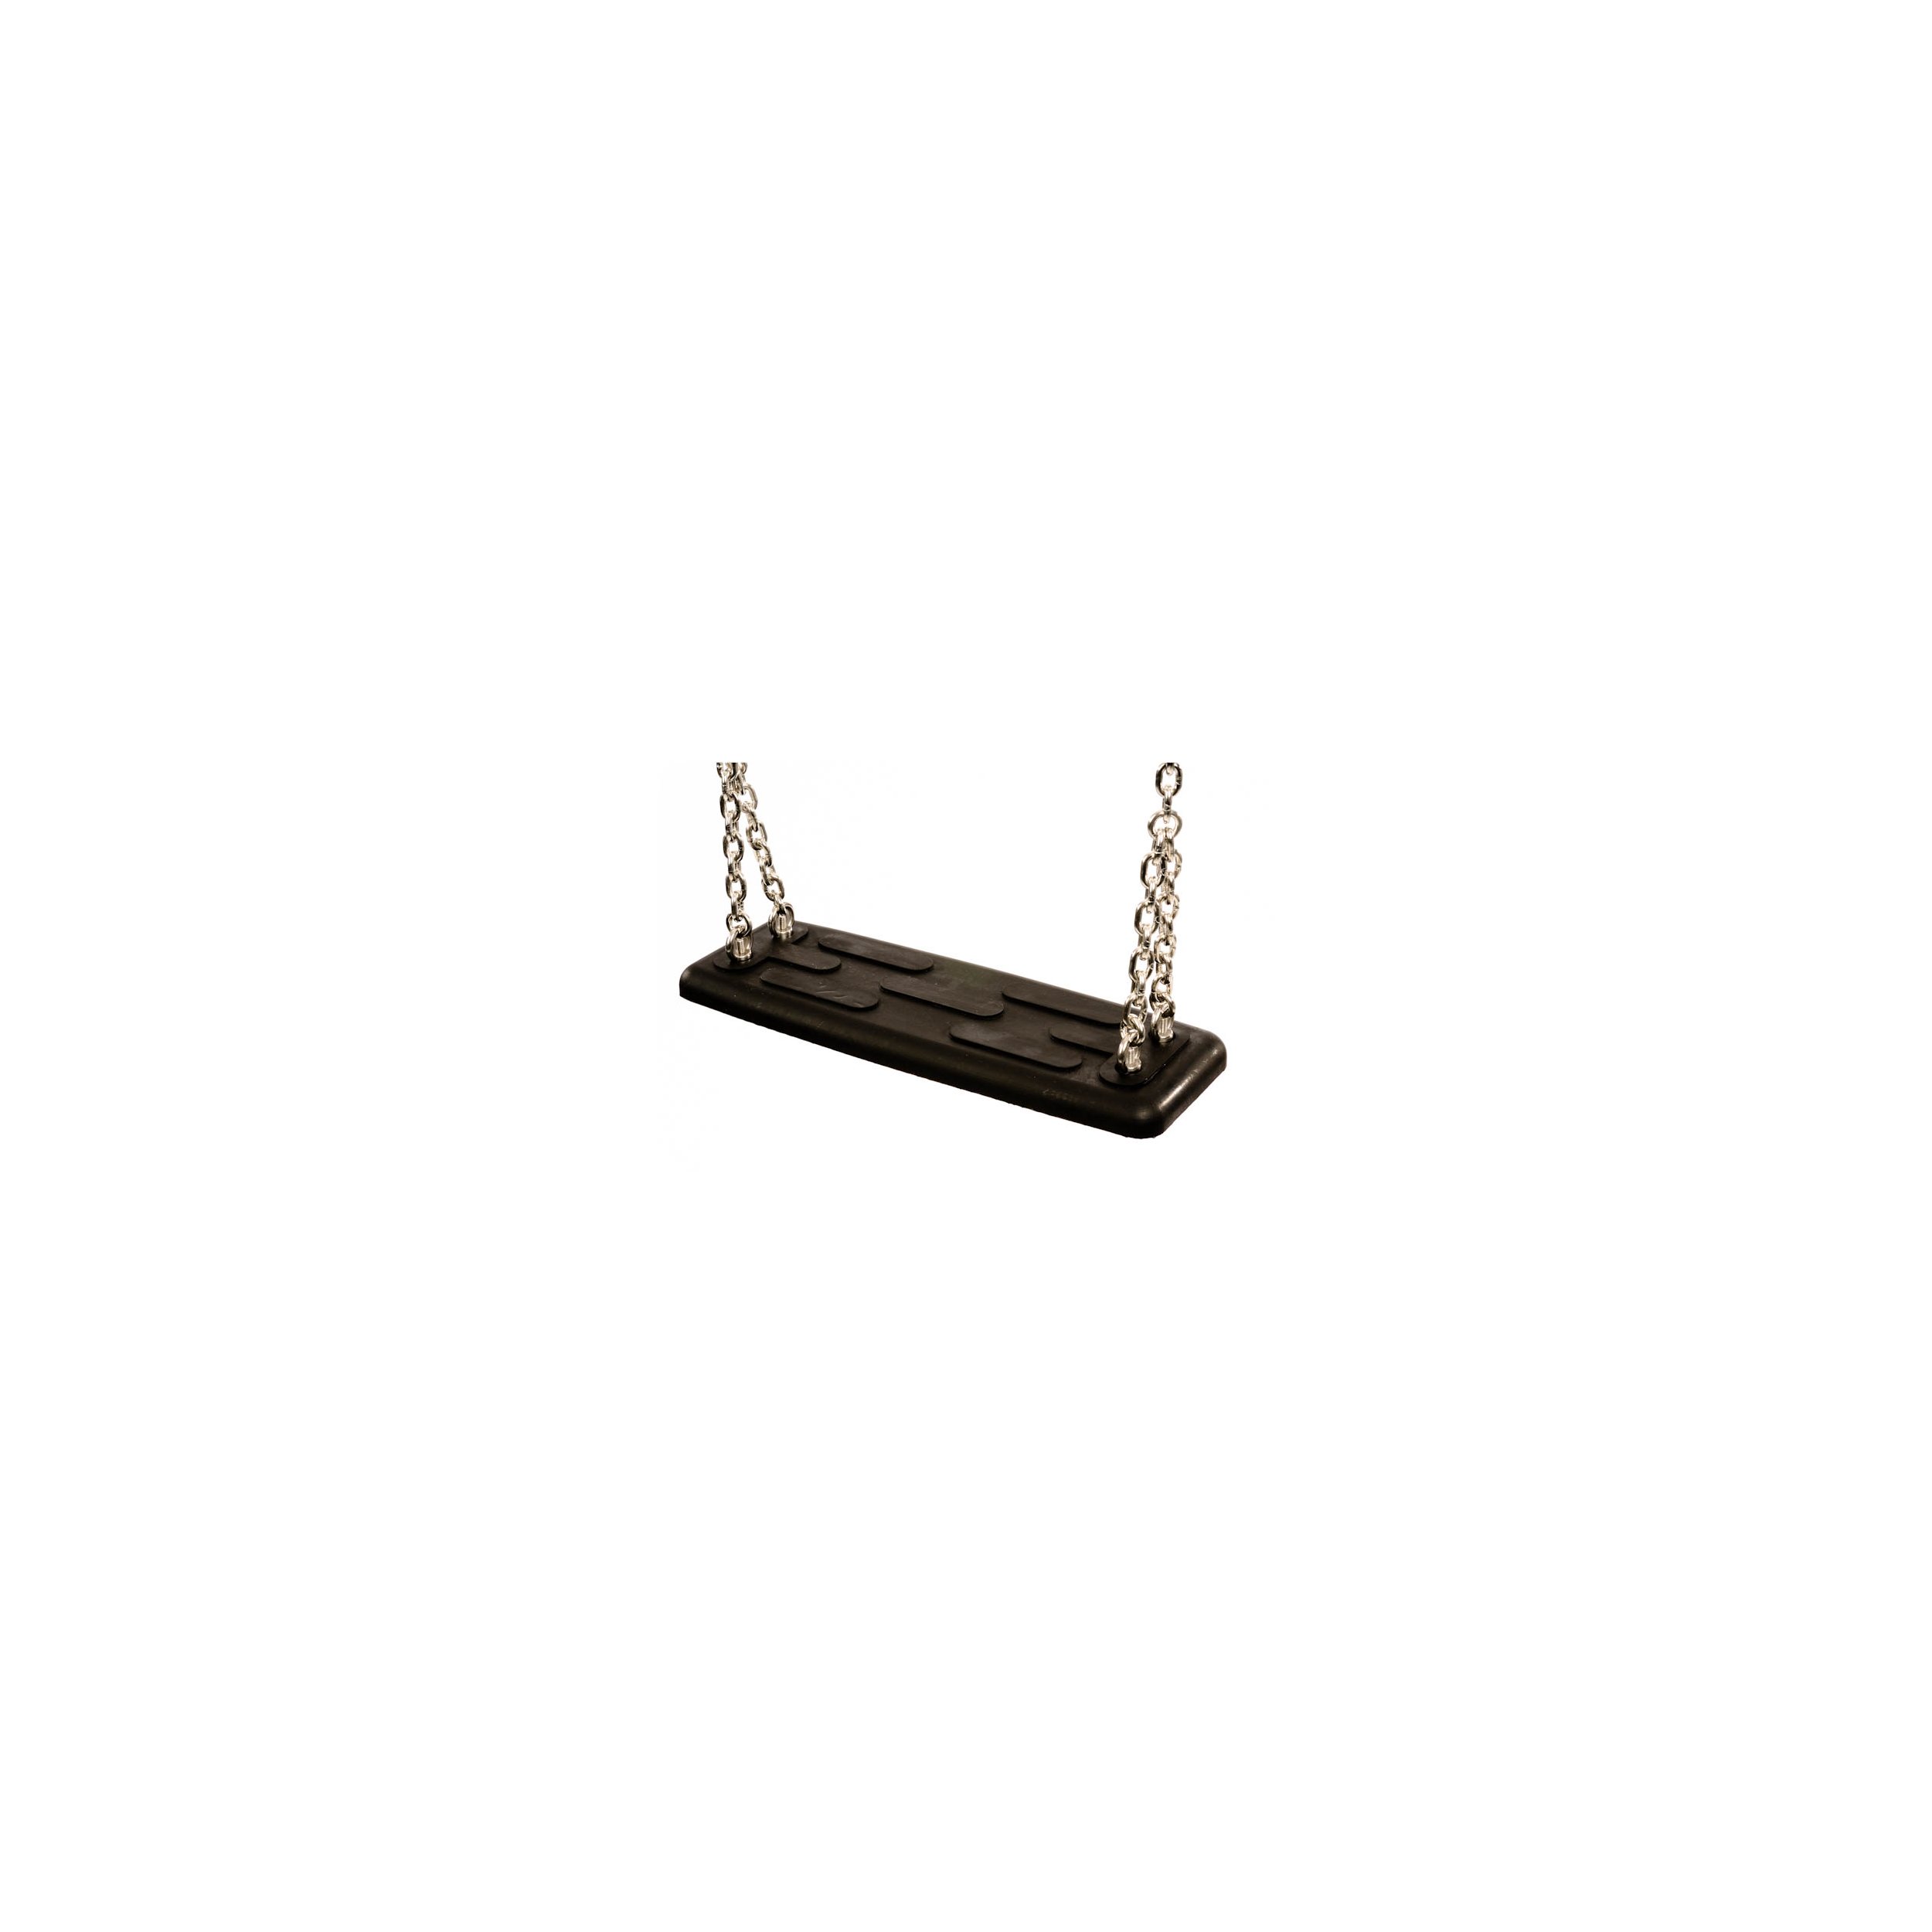 Commercial safety rubber swing seat type 2A black without chains without chains